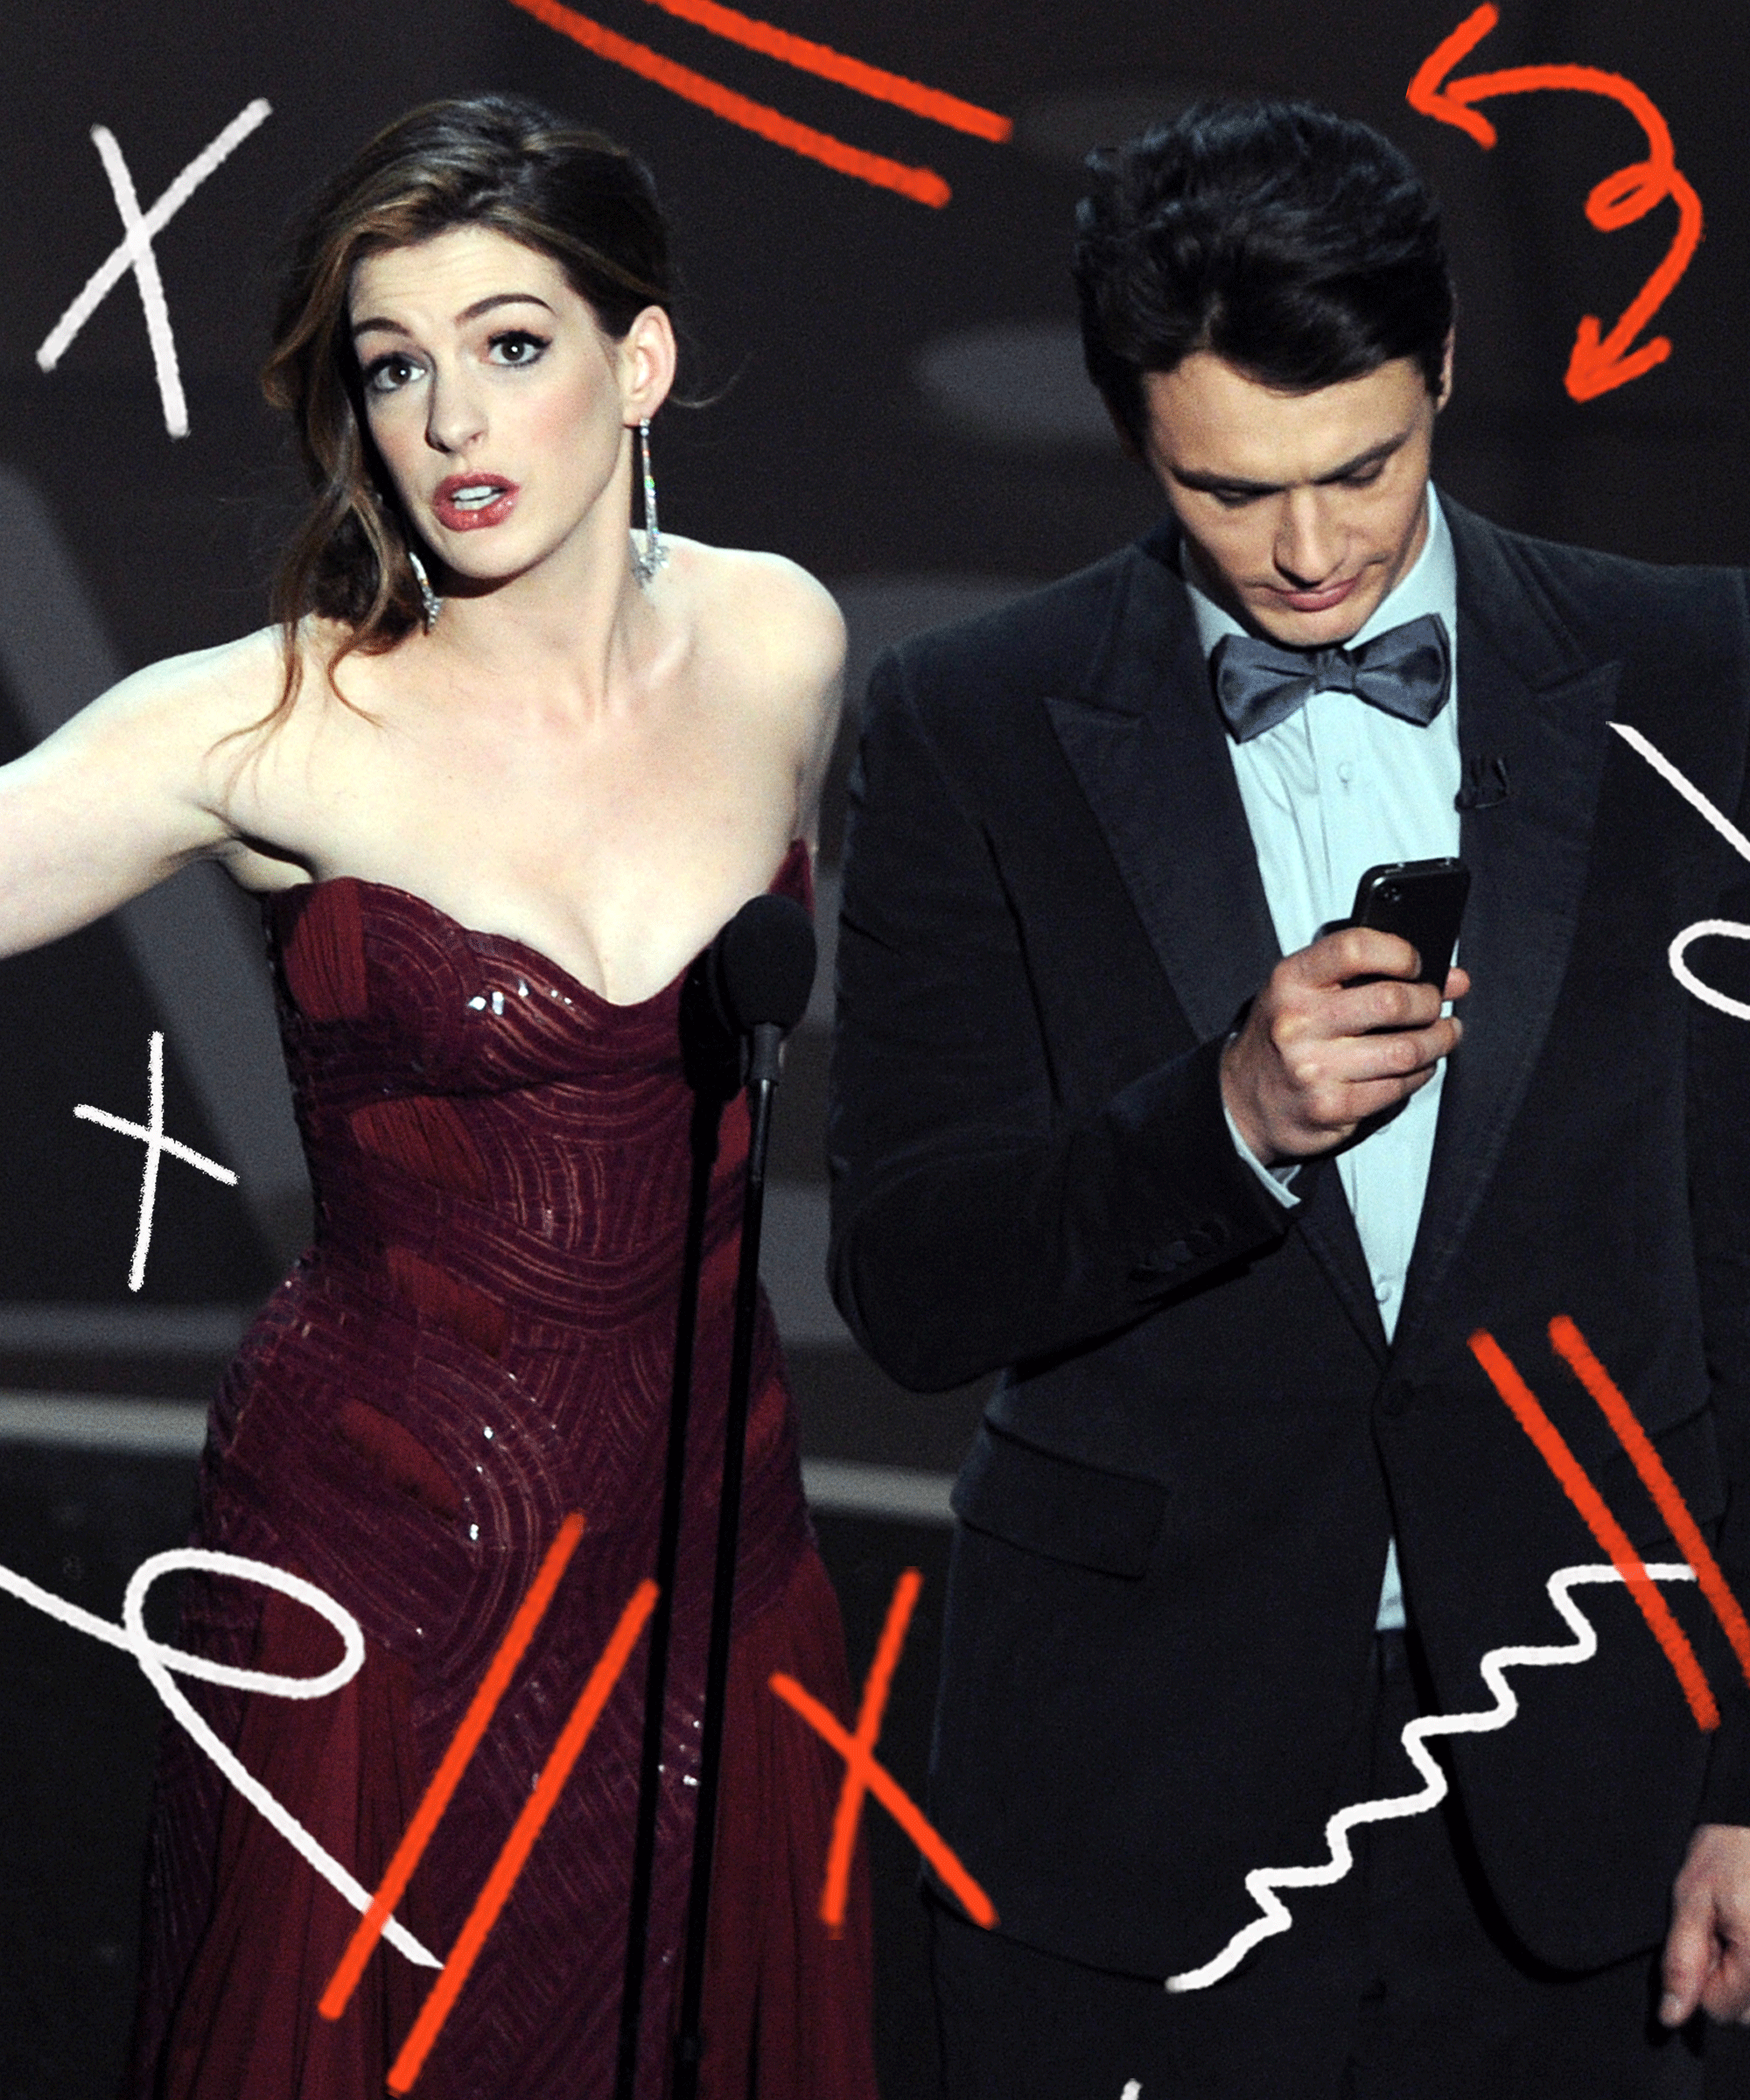 Oscars 2014: Anne Hathaway, Julia Roberts, Amy Adams on the Red Carpet -  Rediff.com